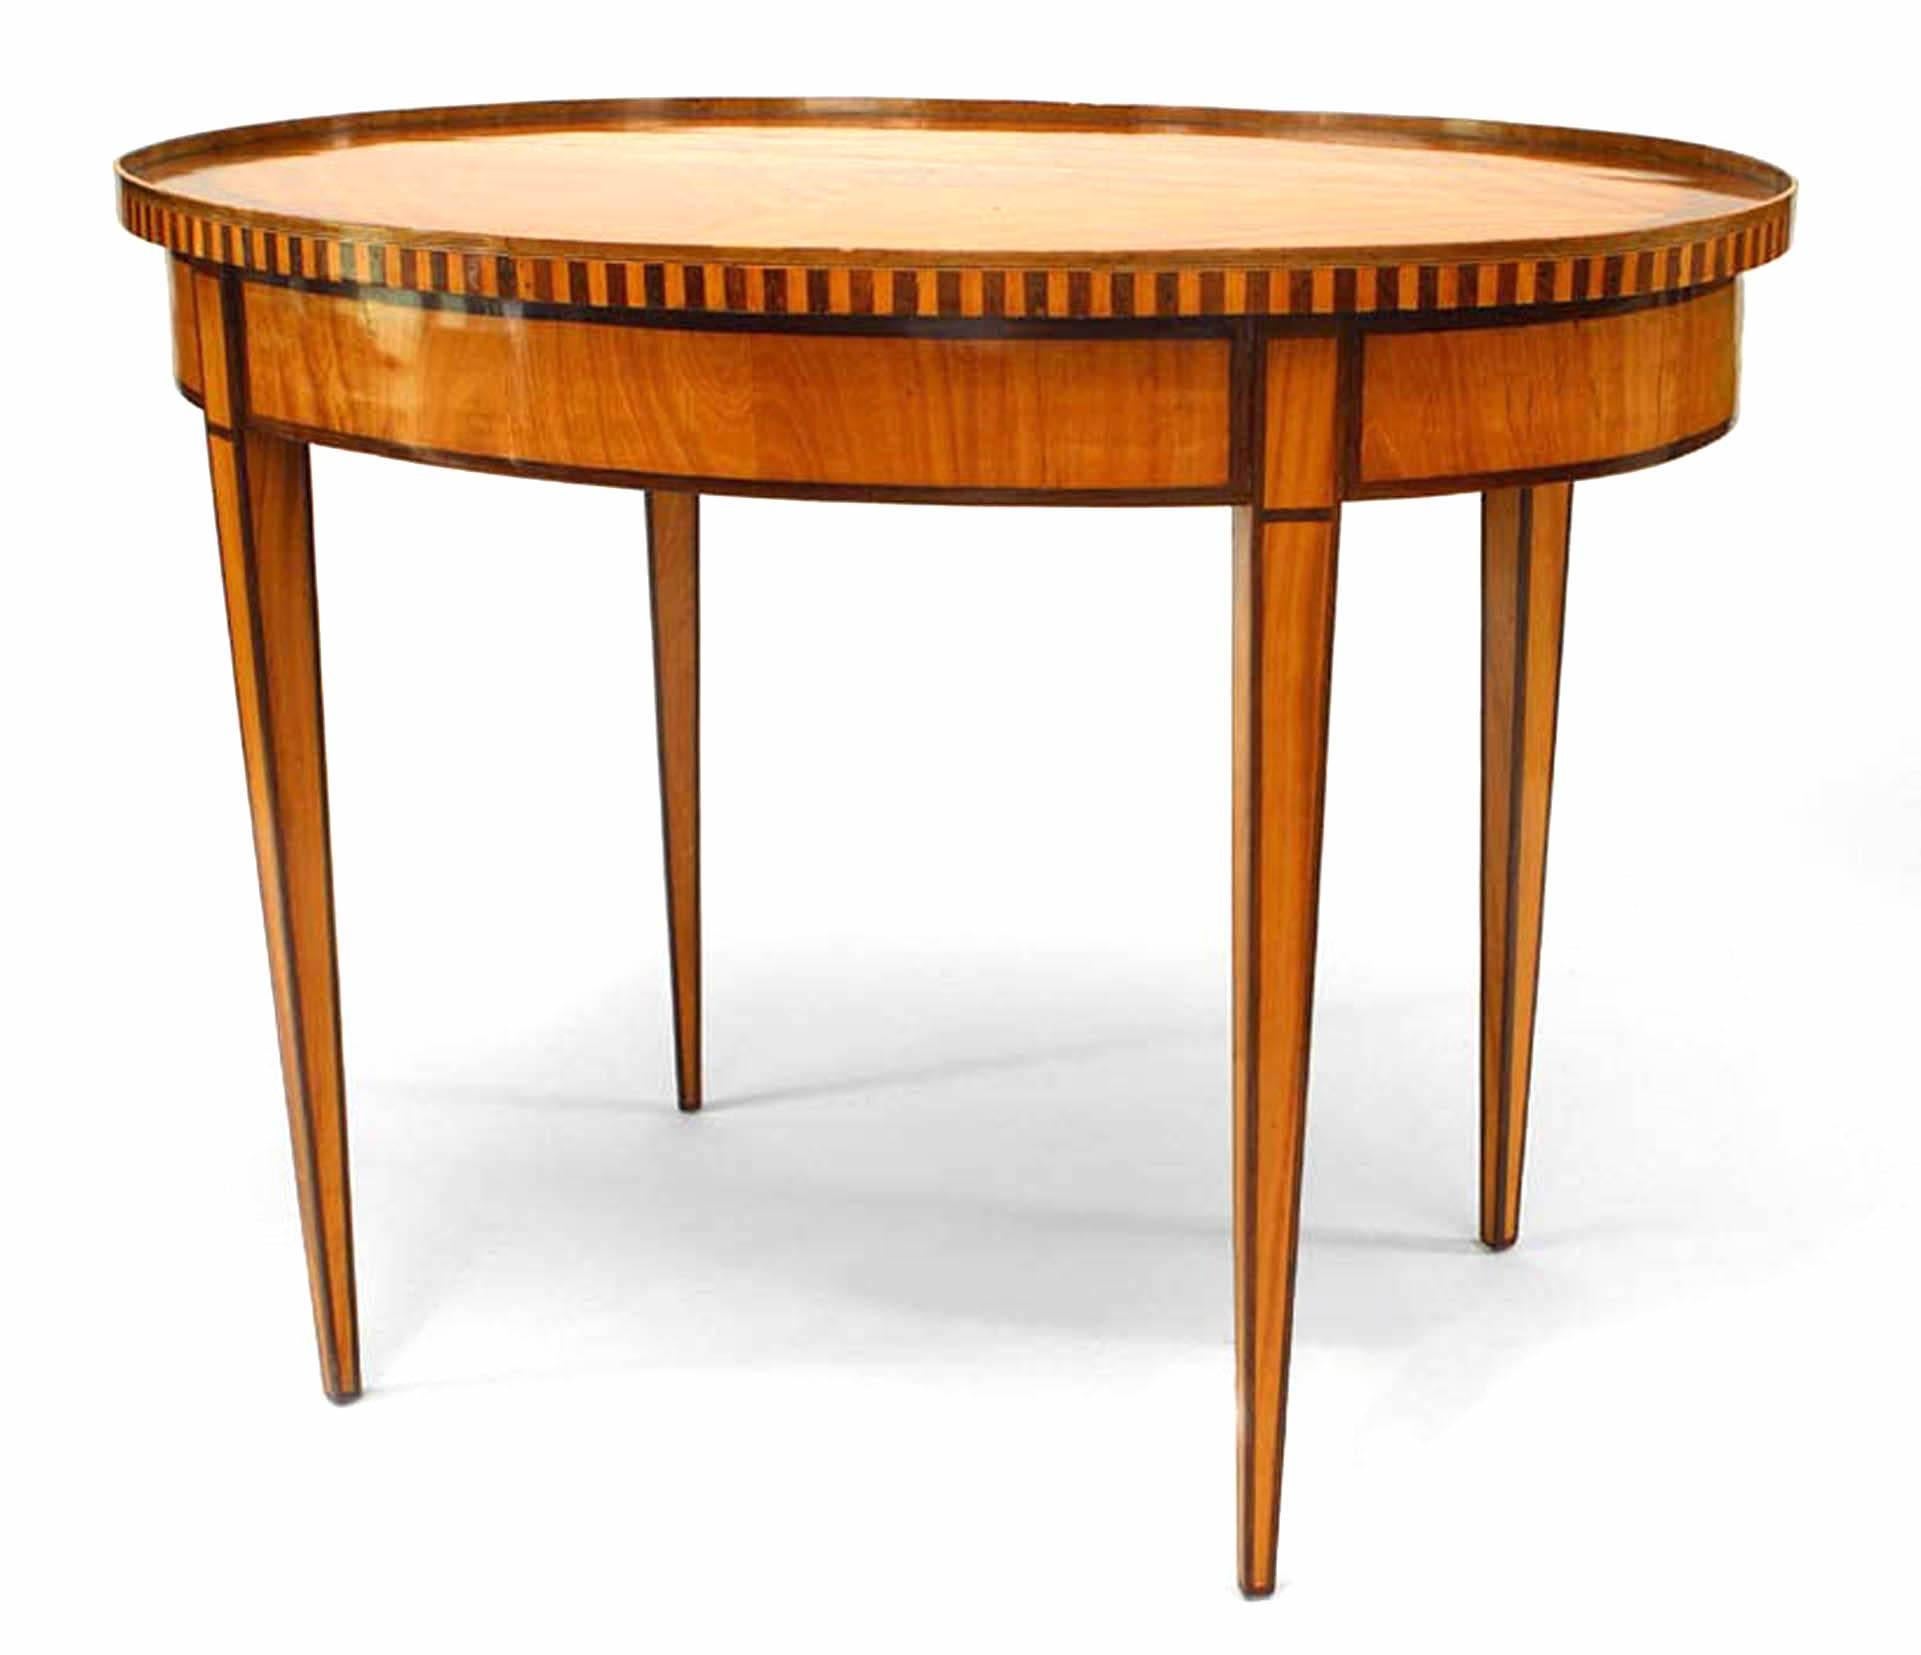 Continental Dutch (18/19th Century) oval satinwood and rosewood inlaid 4 legged center table with gallery and inlaid medallion center.
